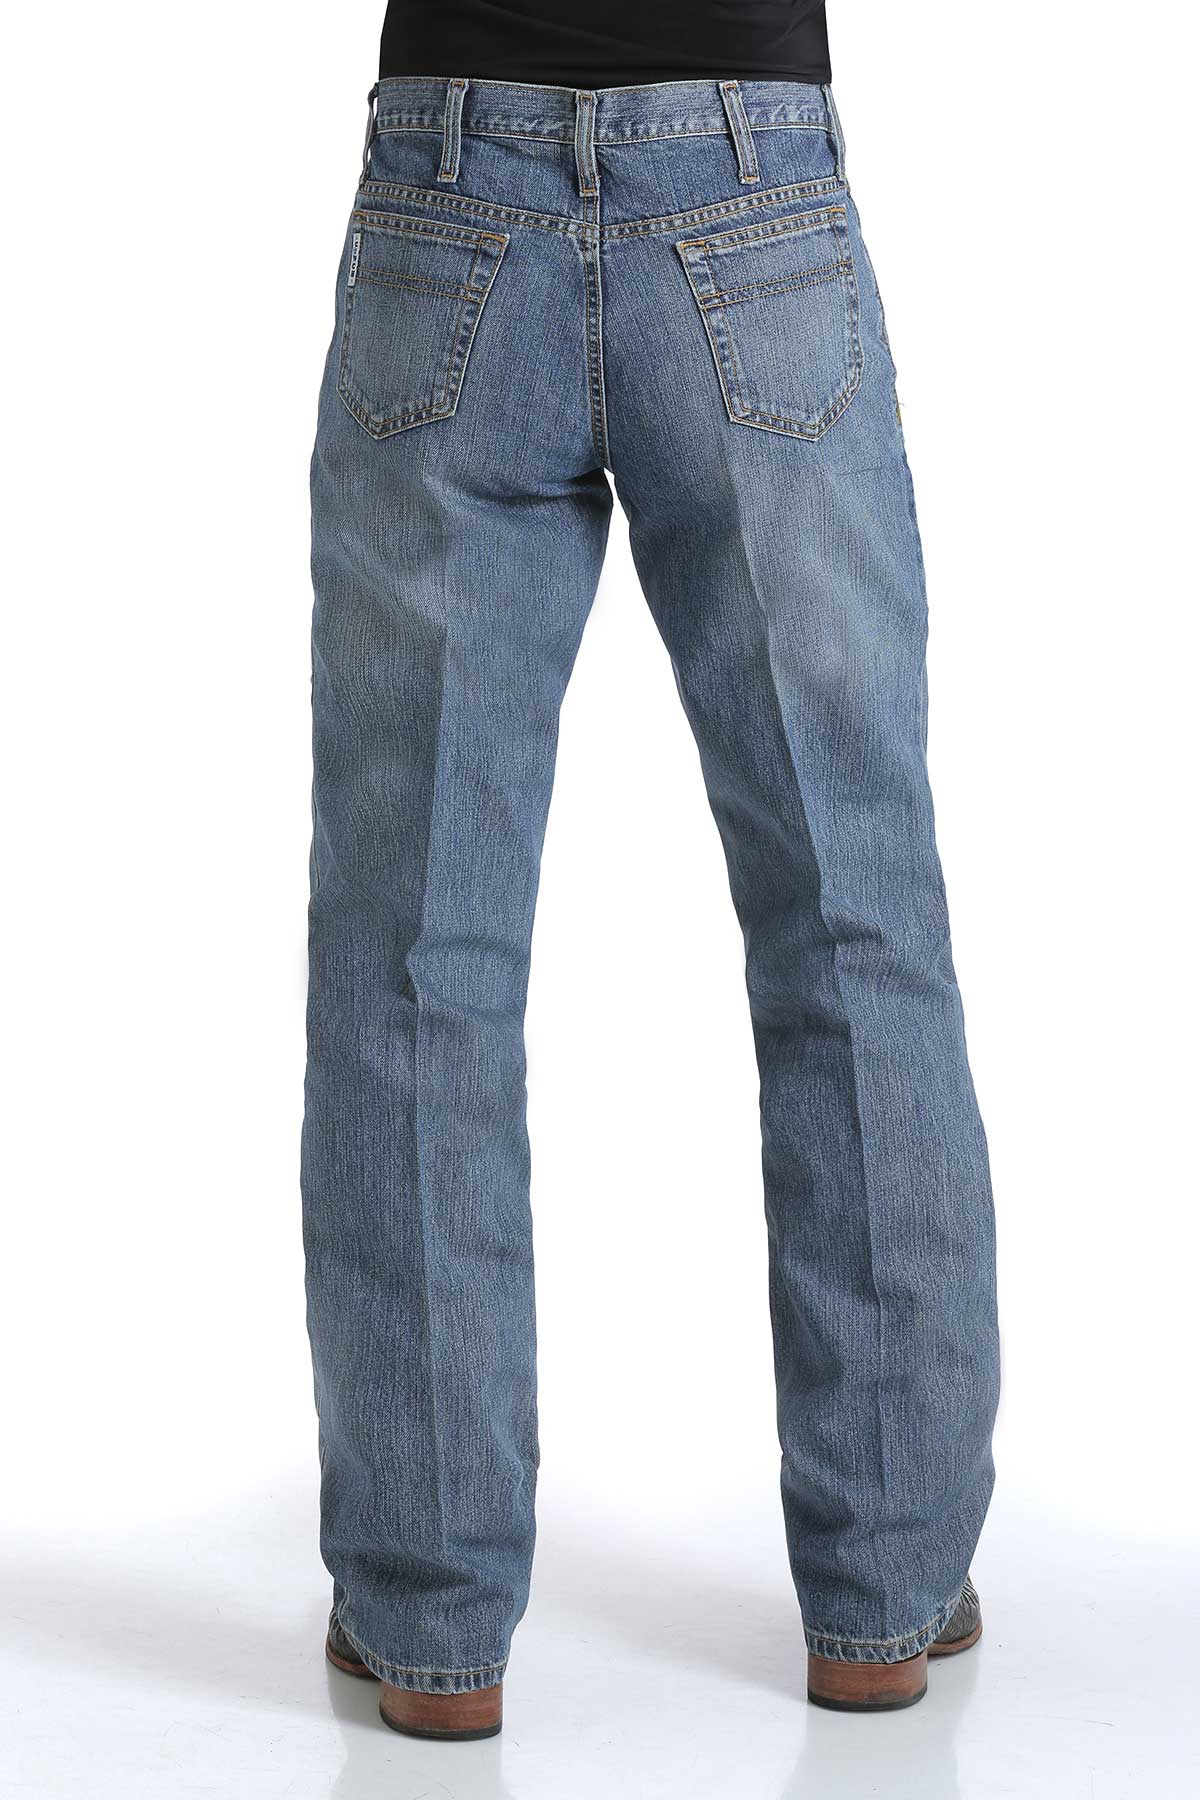 CINCH Men's Relaxed Fit White Label Jeans - Medium Stonewash